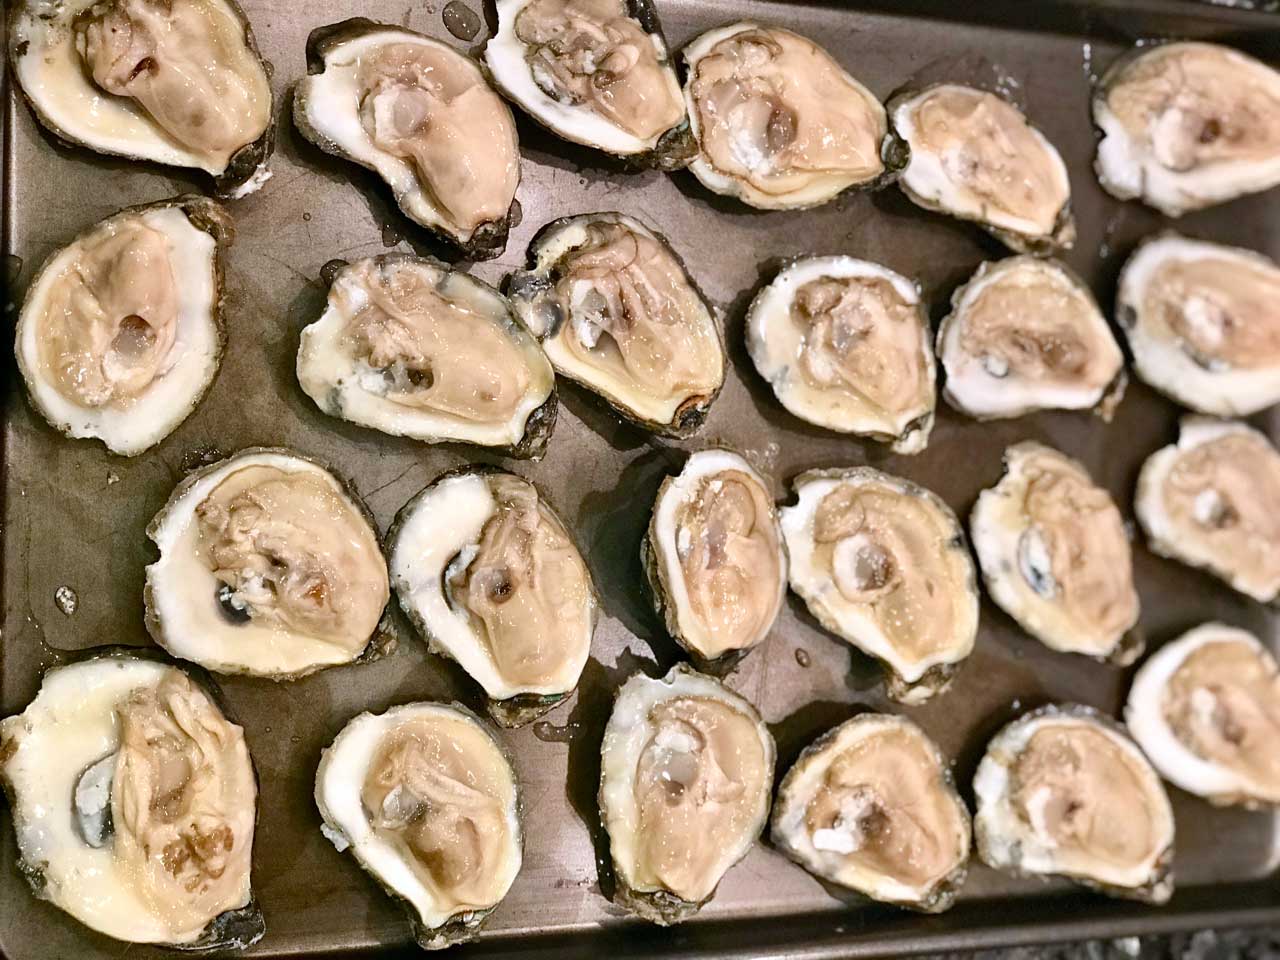 Maryland Oysters - Raw On The Half Shell